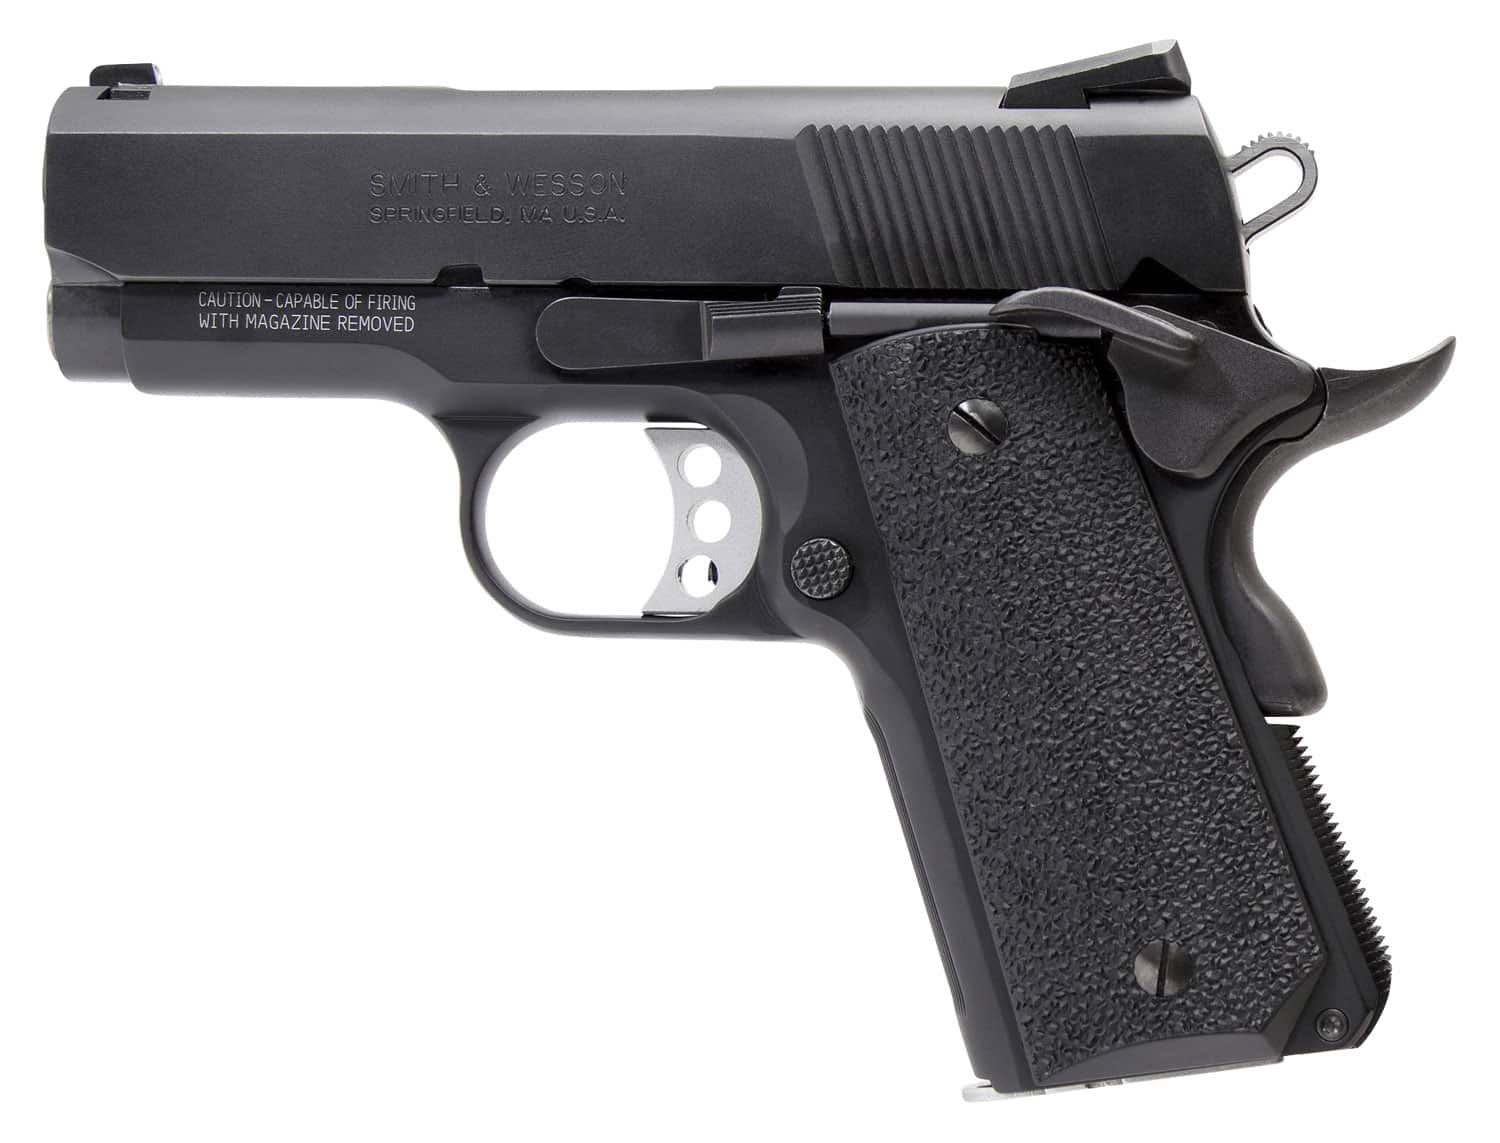 Image of SMITH & WESSON 1911 PC Pro